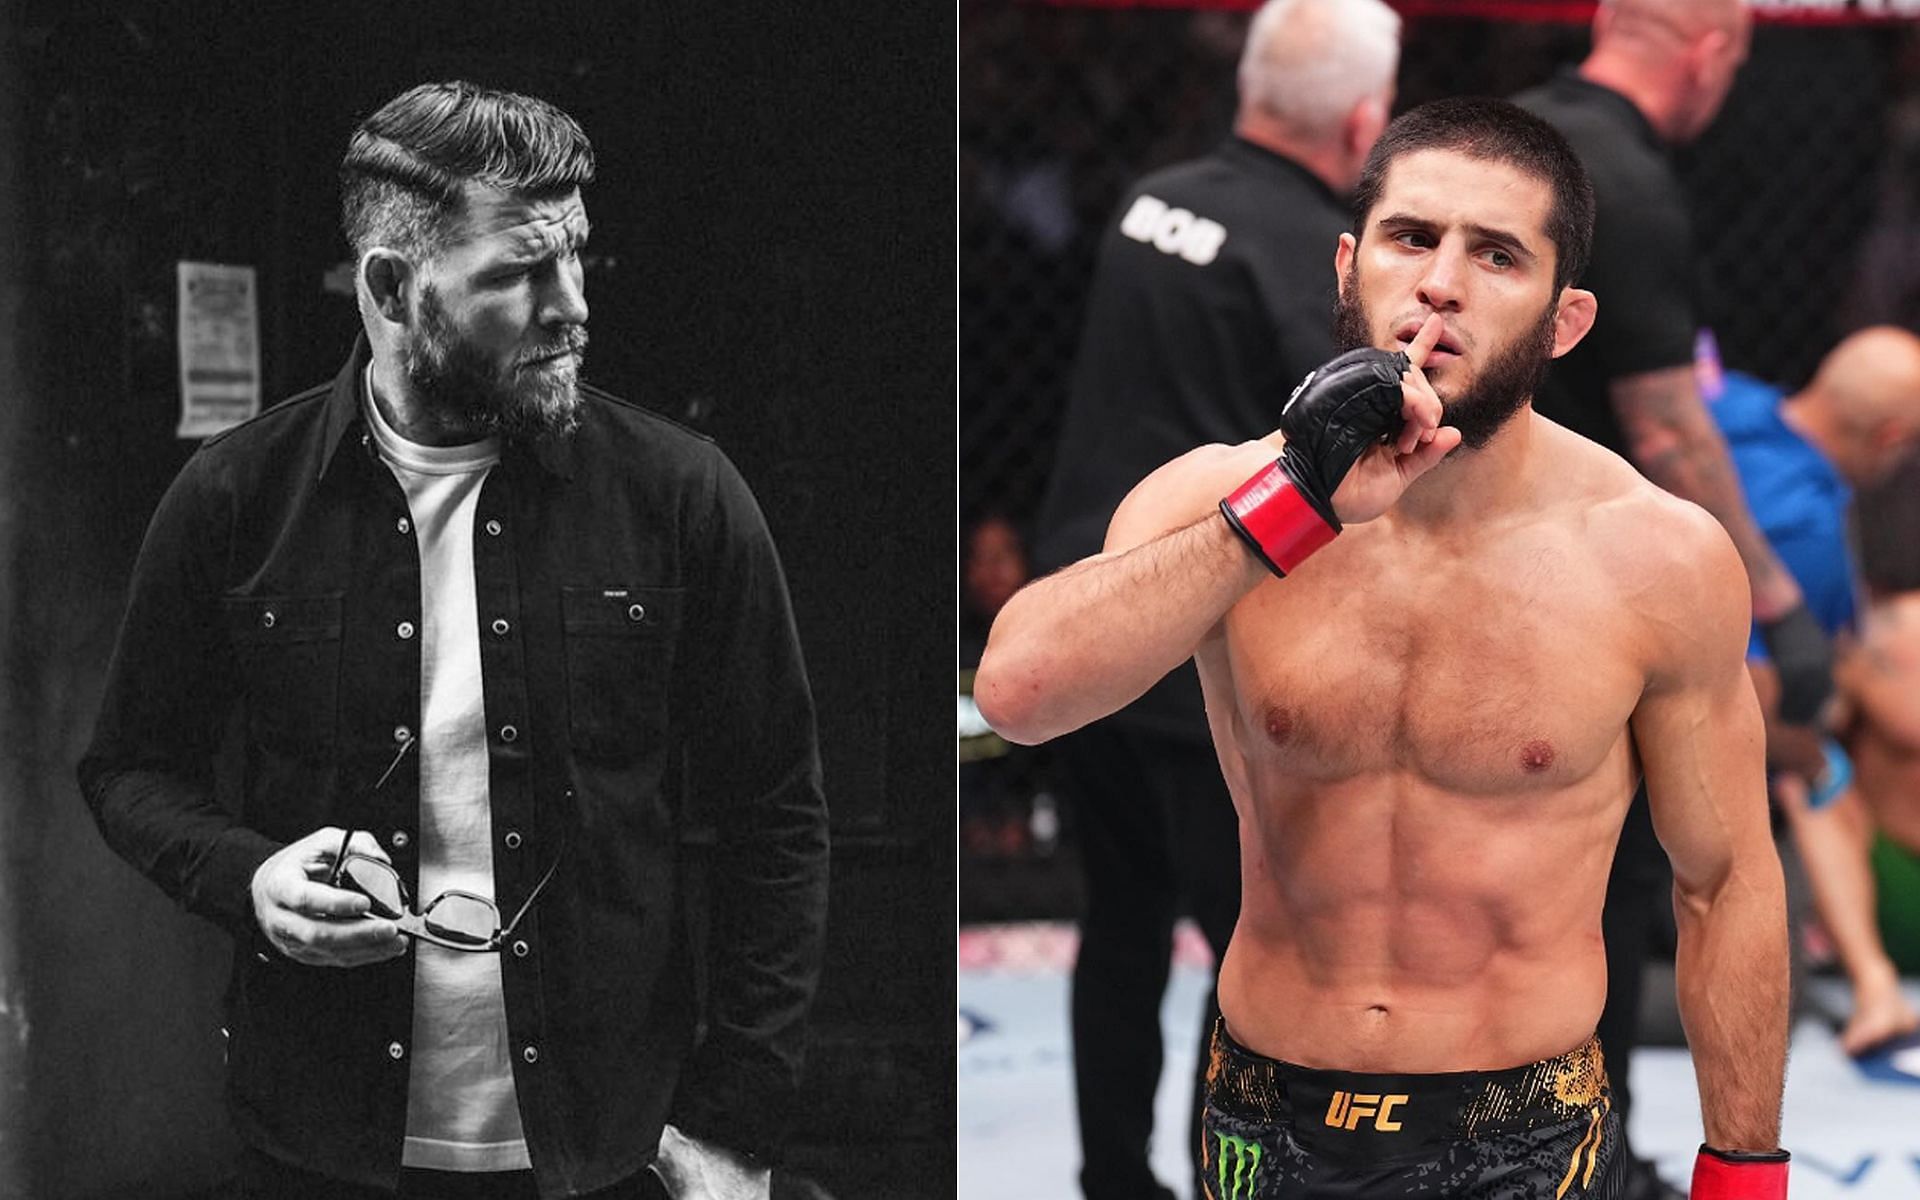 Michael Bisping (left) and Islam Makhachev (right) (Images via @mikebisping and @ufc Instagram)